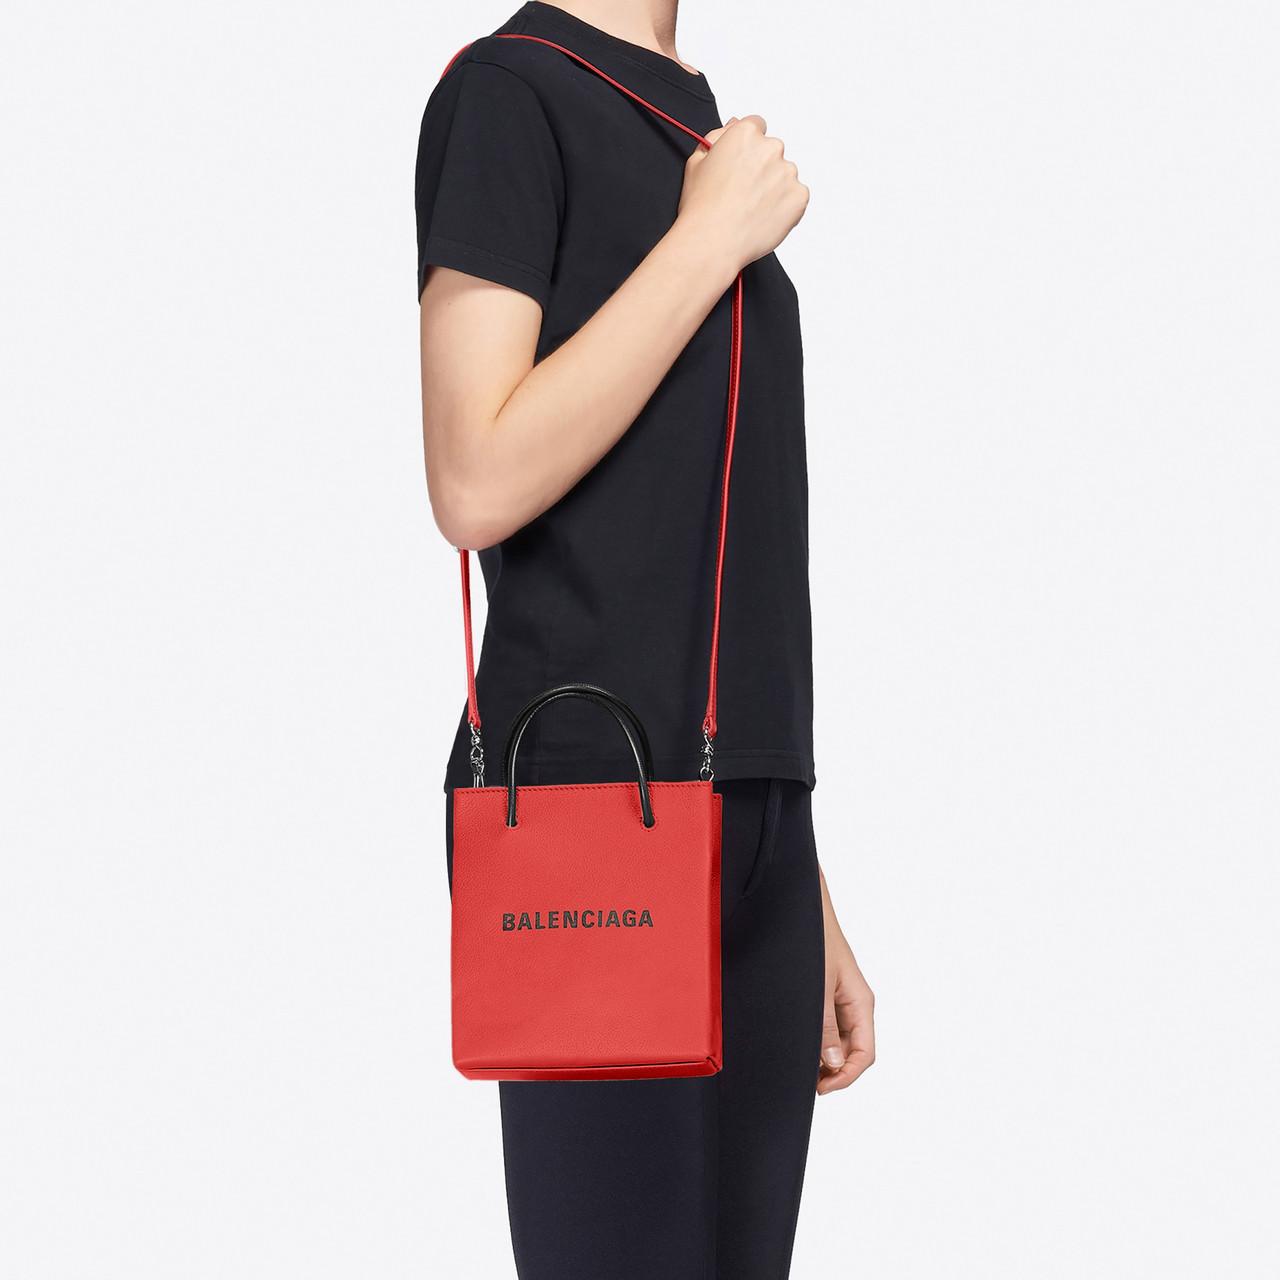 Balenciaga Leather Shopping Tote Bag in Lyst